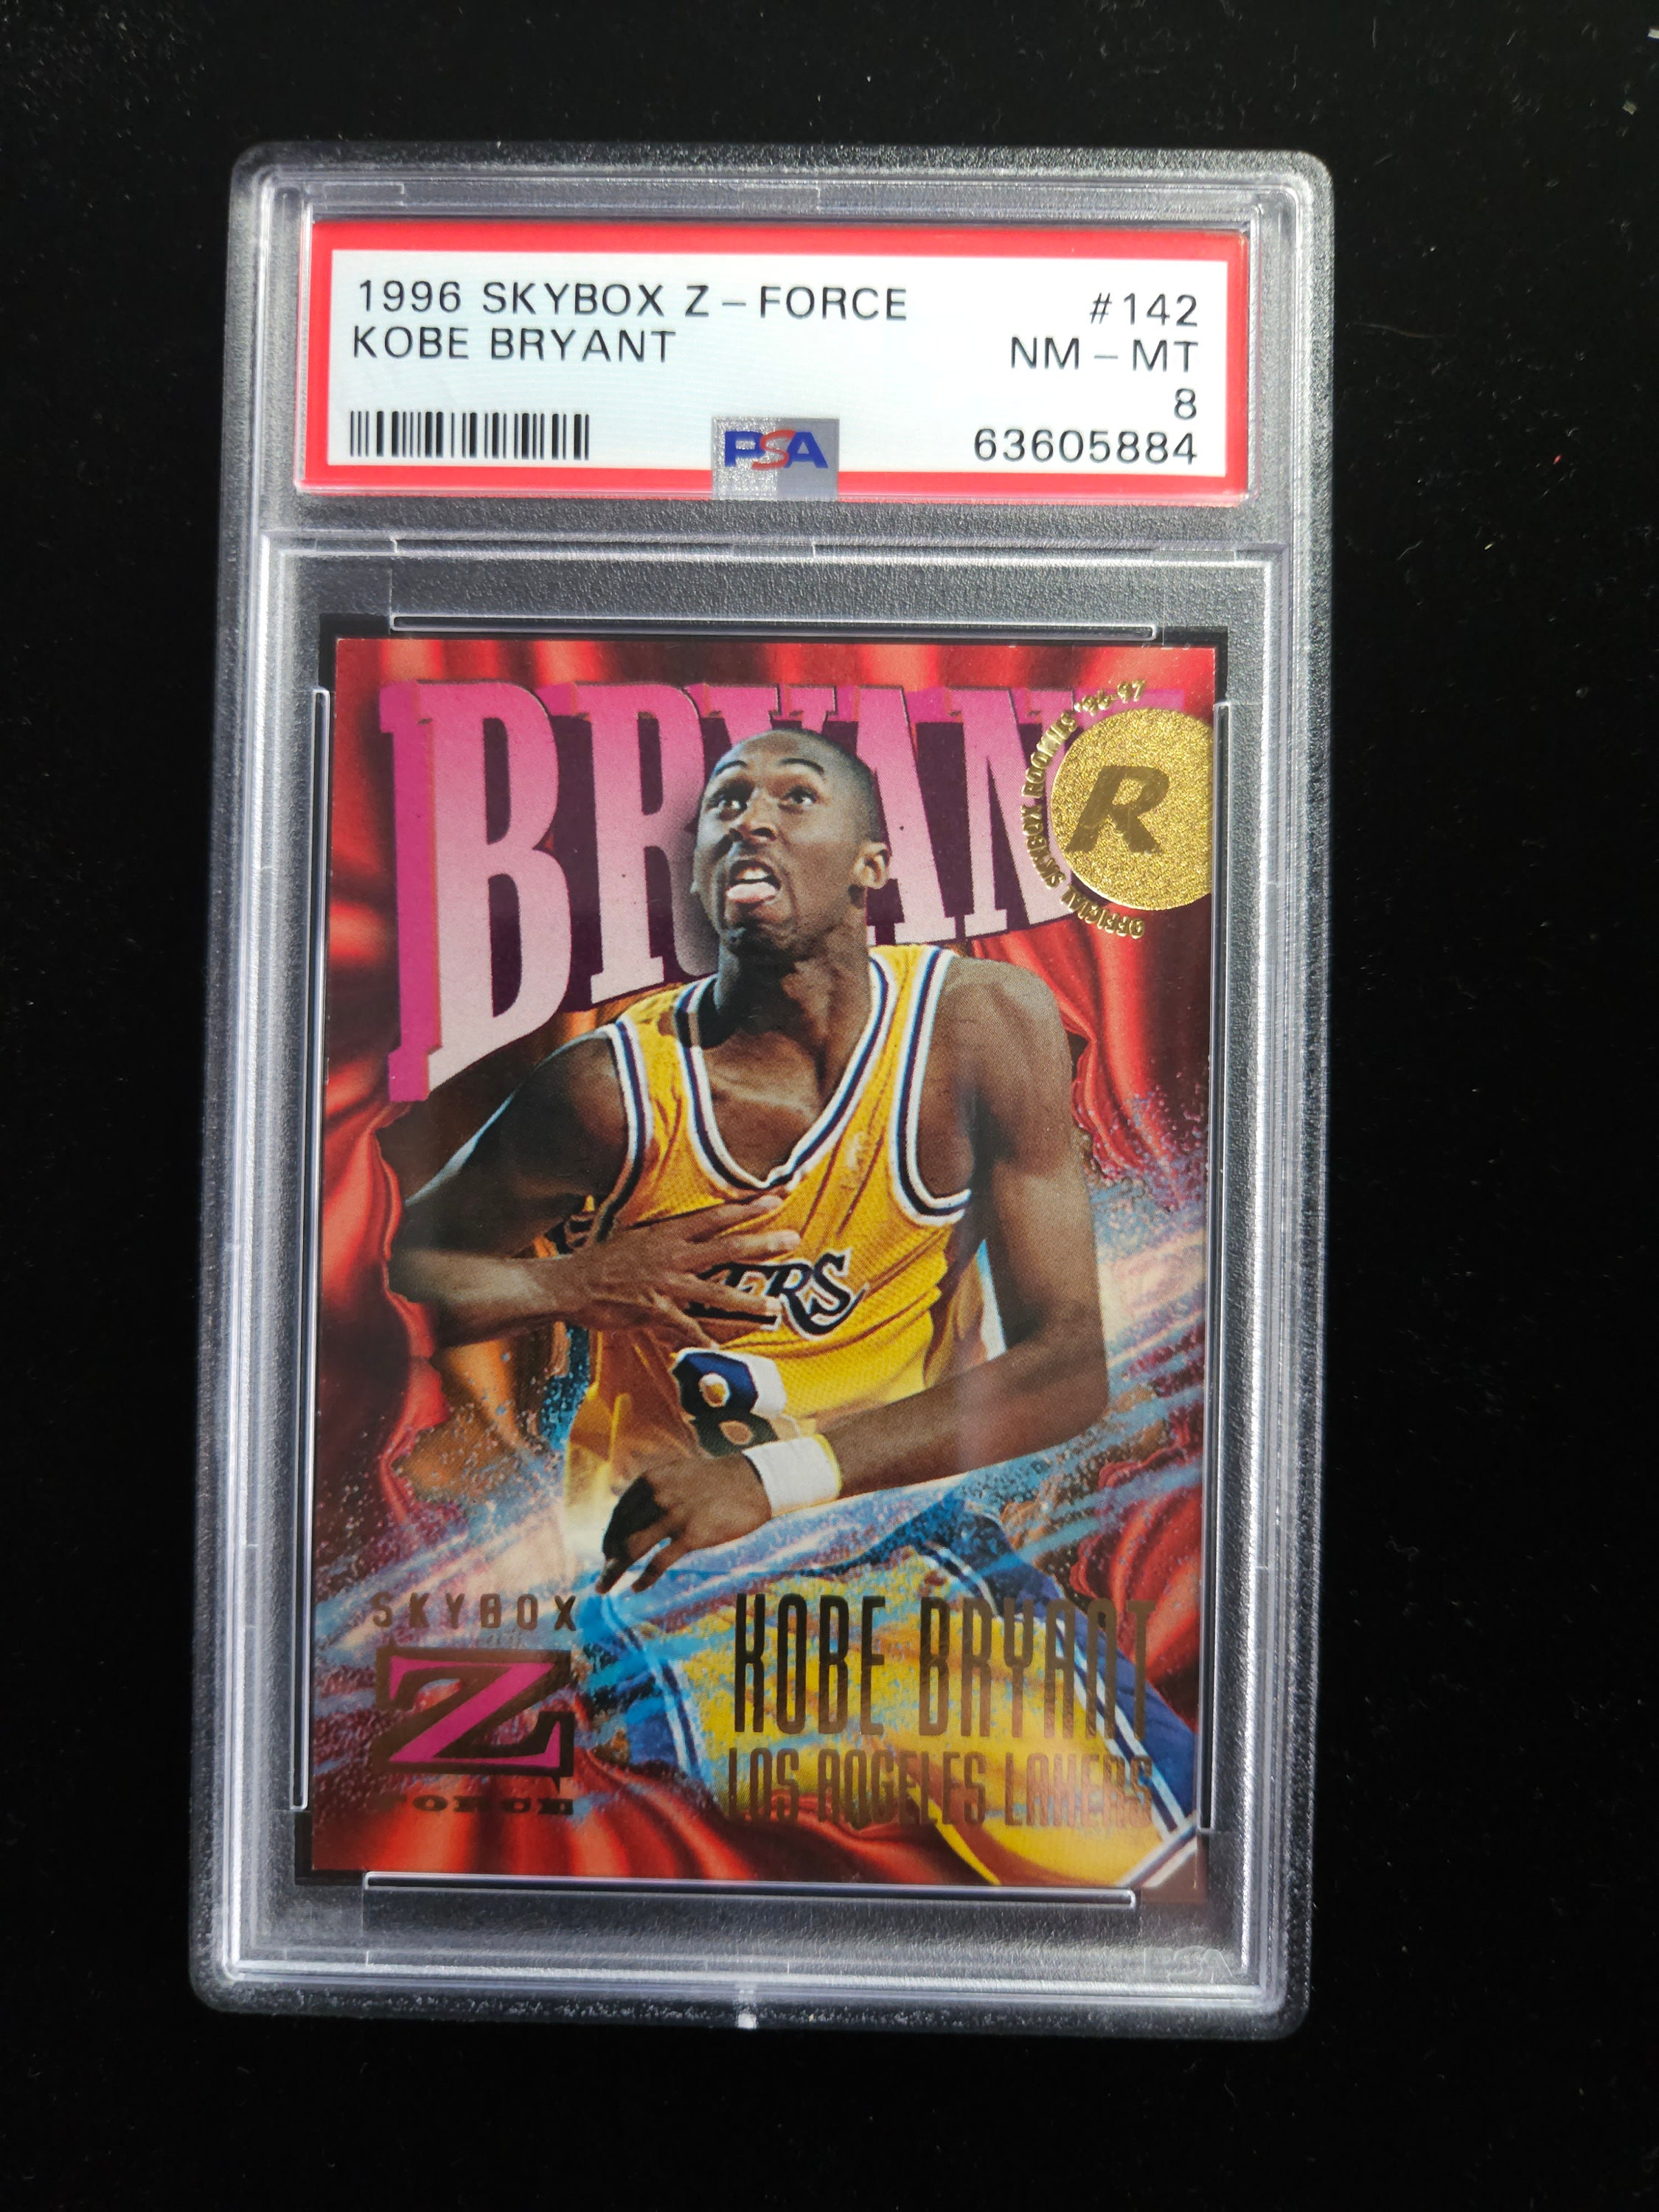 1996 Skybox Z Force Kobe Bryant Signed Autographed RC Rookie Card